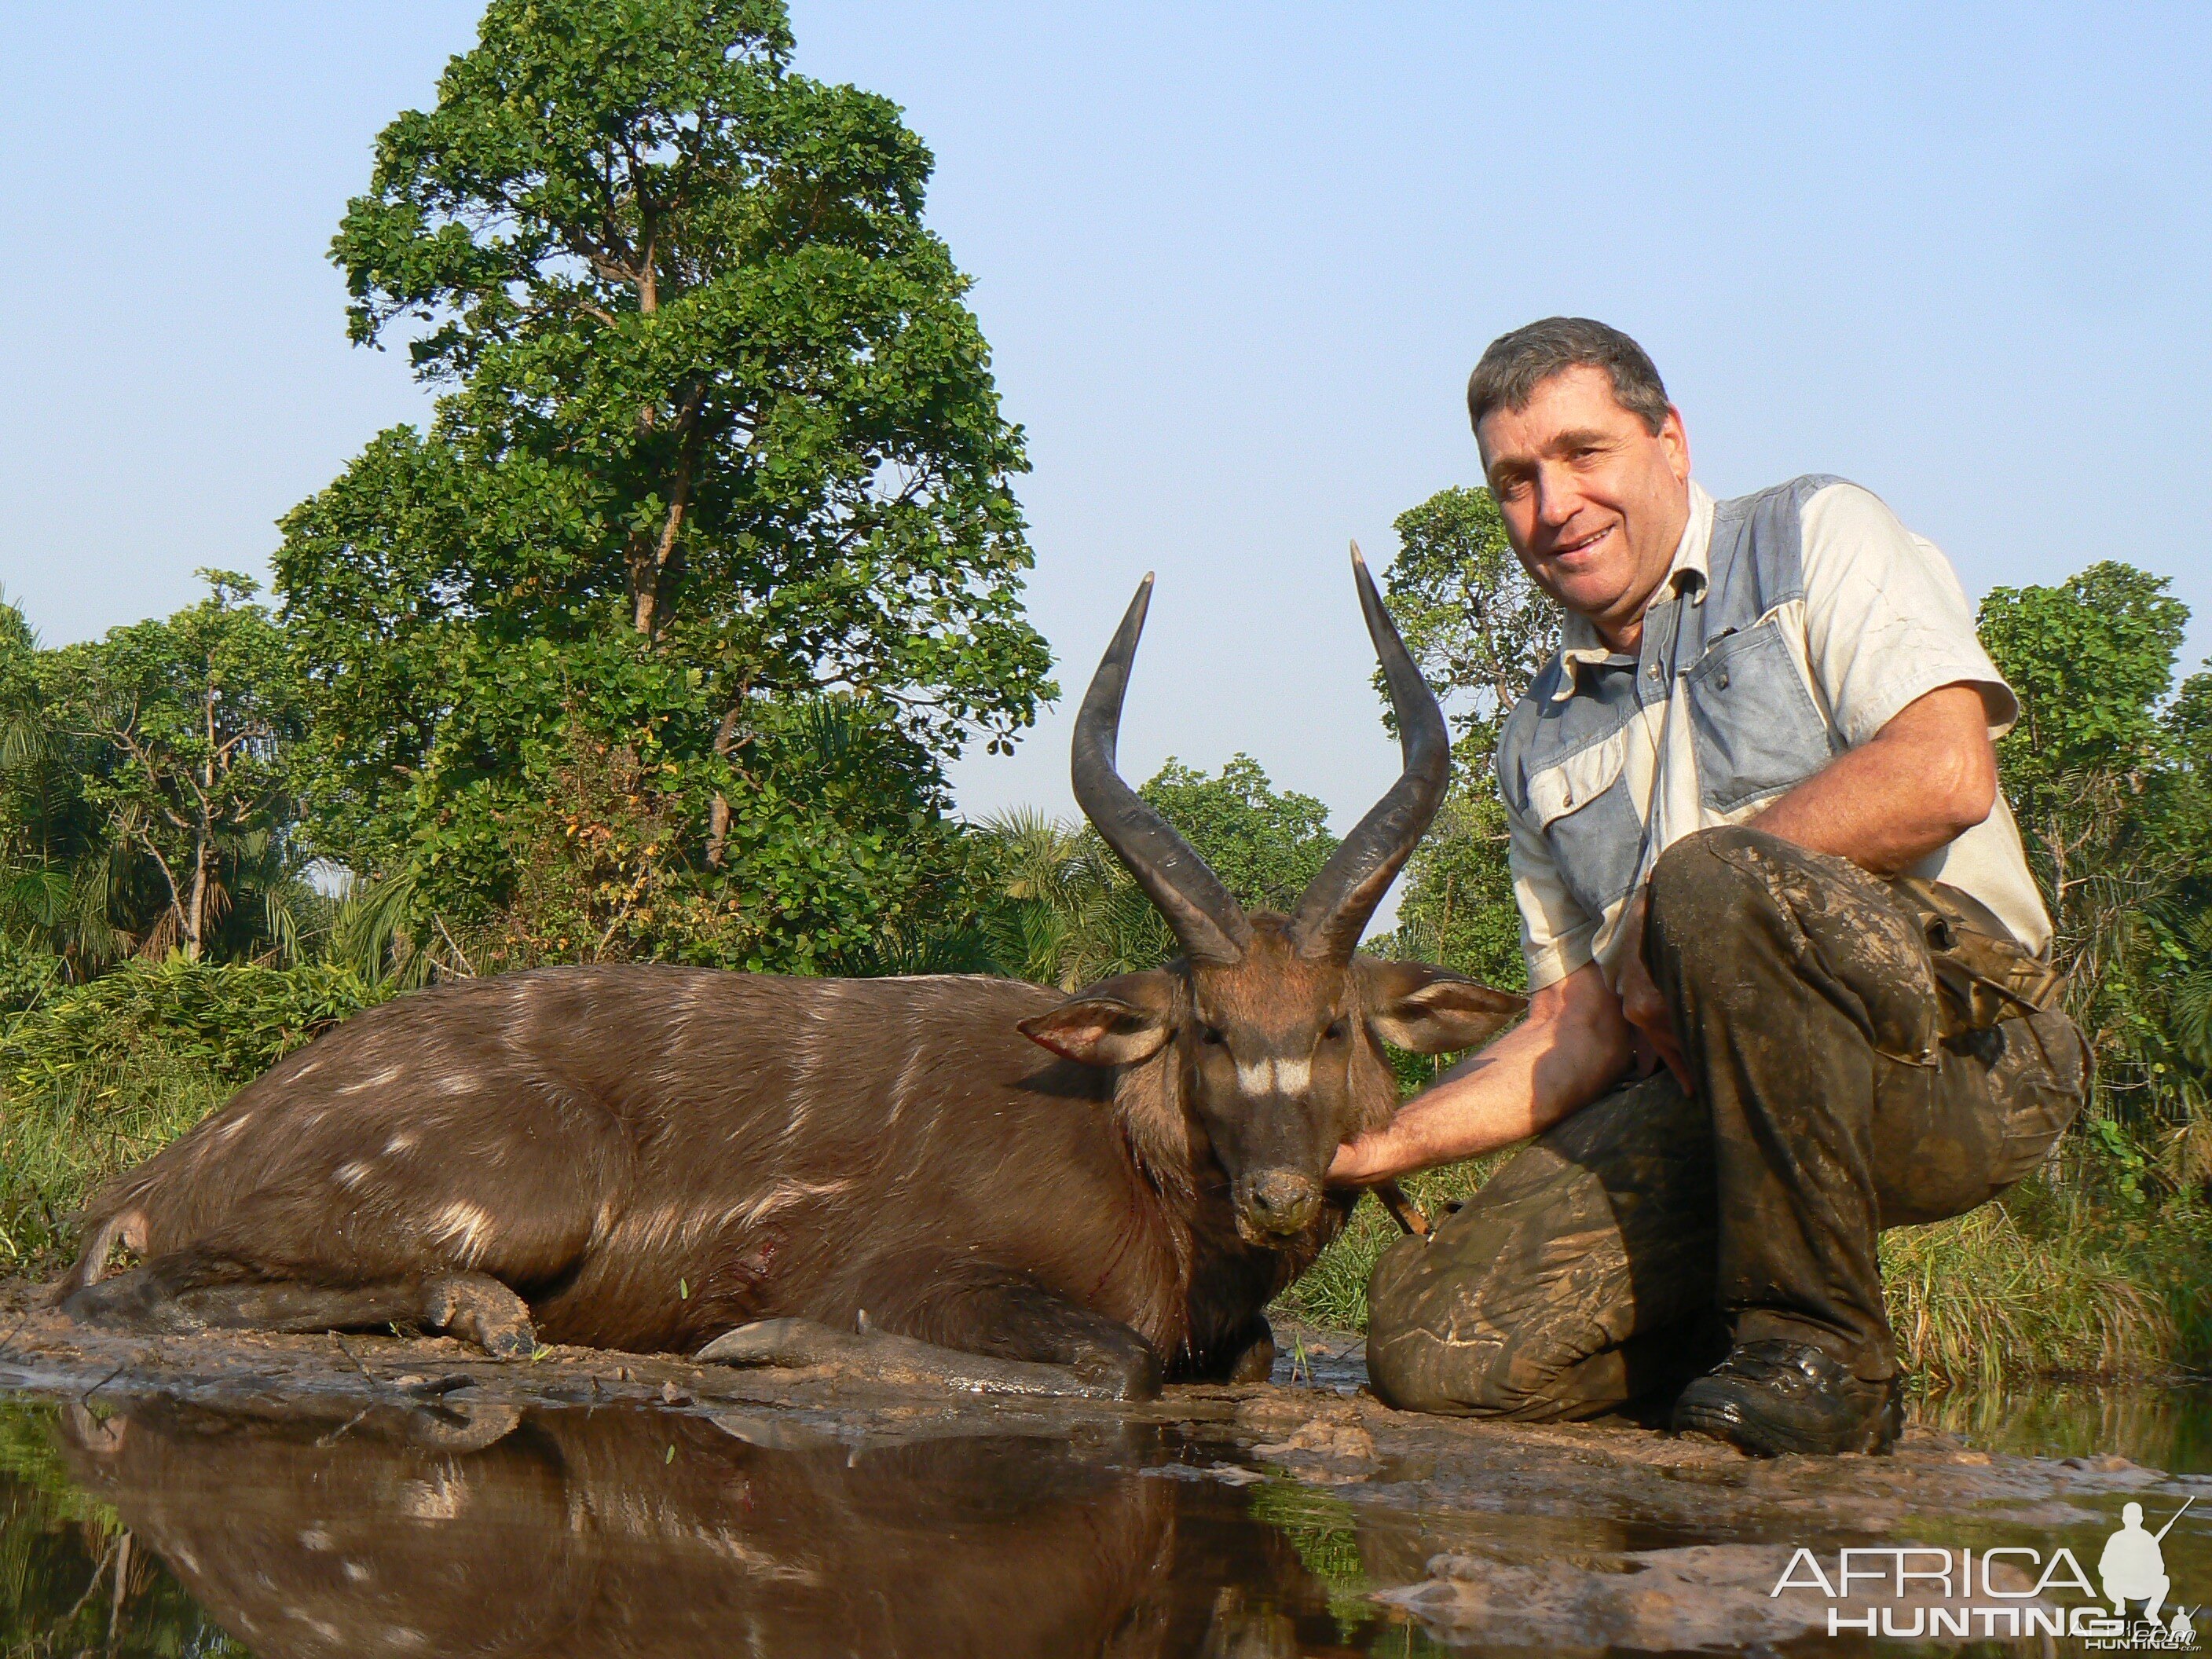 Western Sitatunga hunted in Central Africa with Club Faune